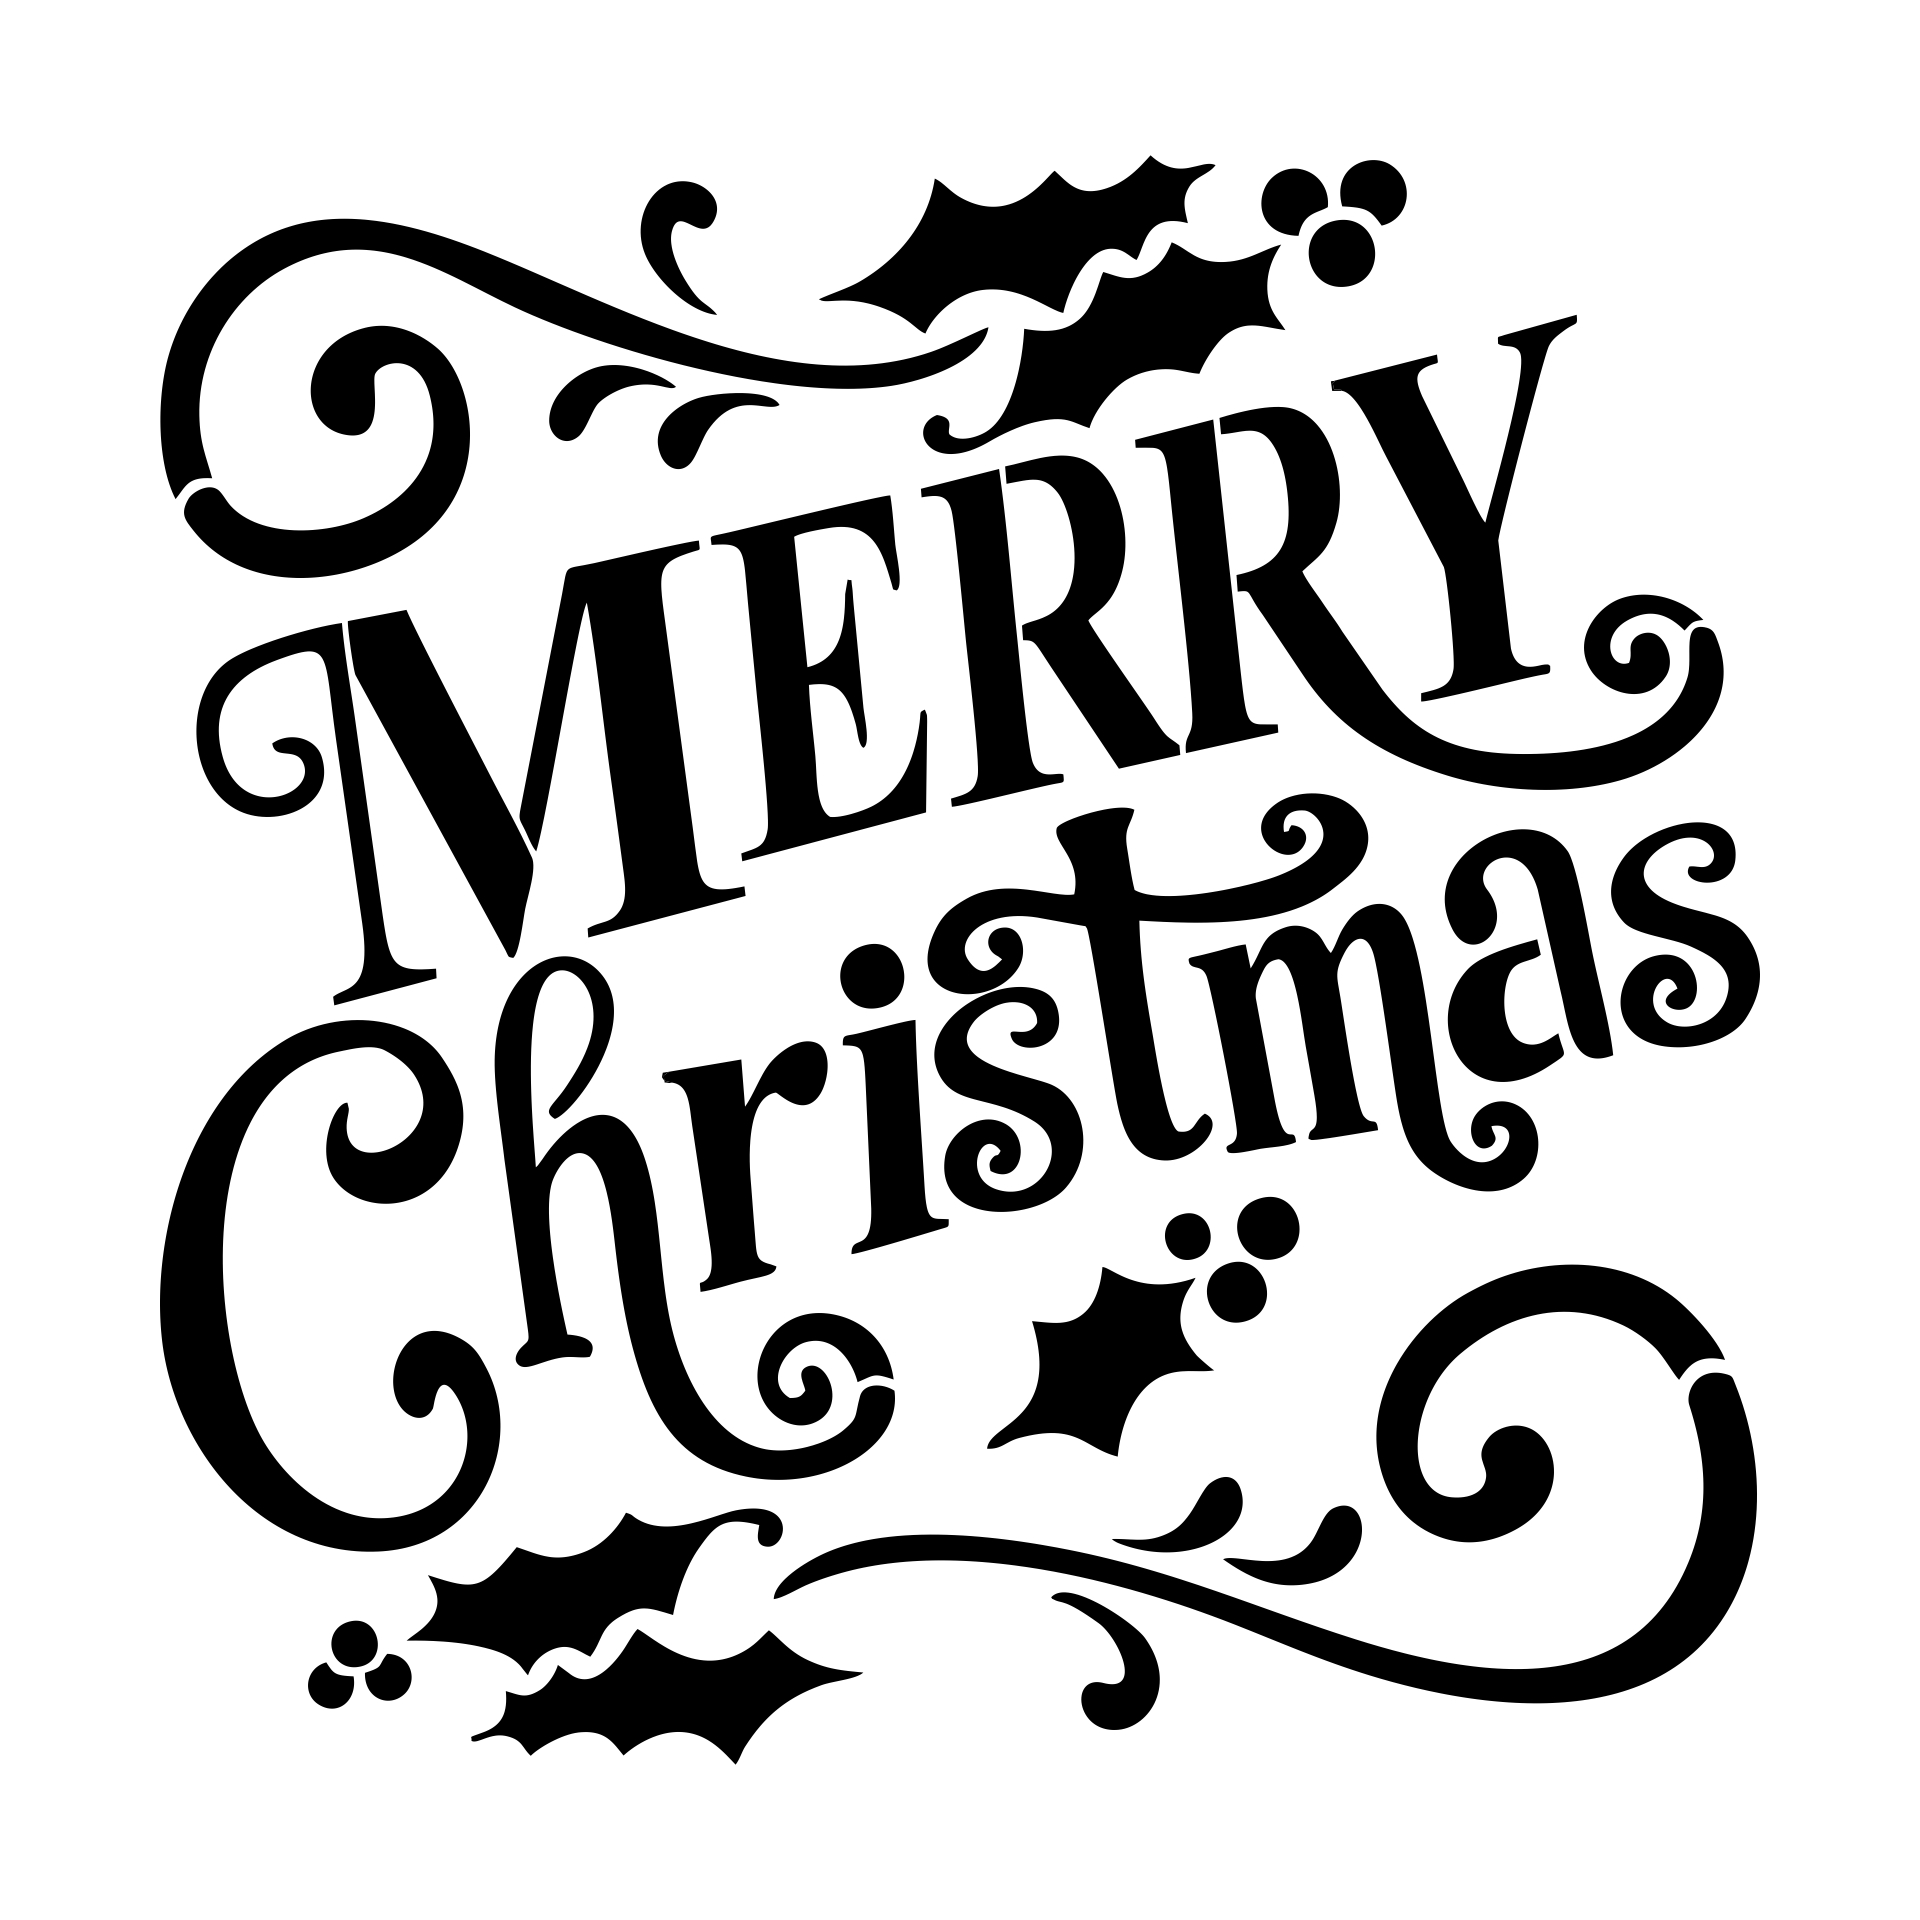 7 Best Images of Merry Christmas Free Printable Stencil - Christmas ...